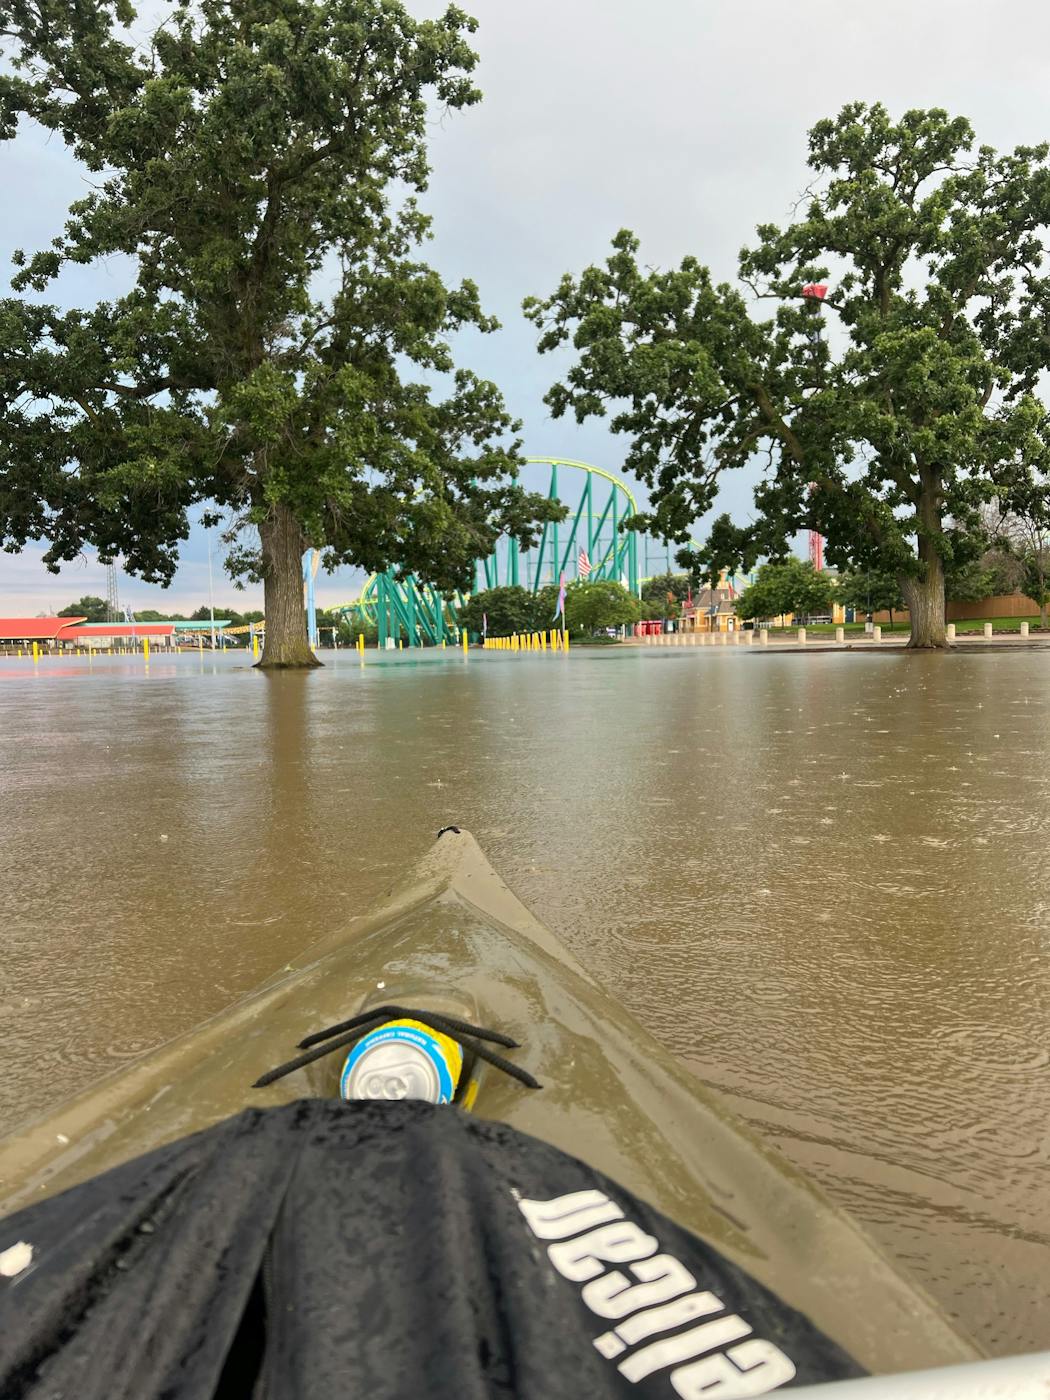 A view from a kayak on the floodwaters at the Valleyfair amusement park in Shakopee.